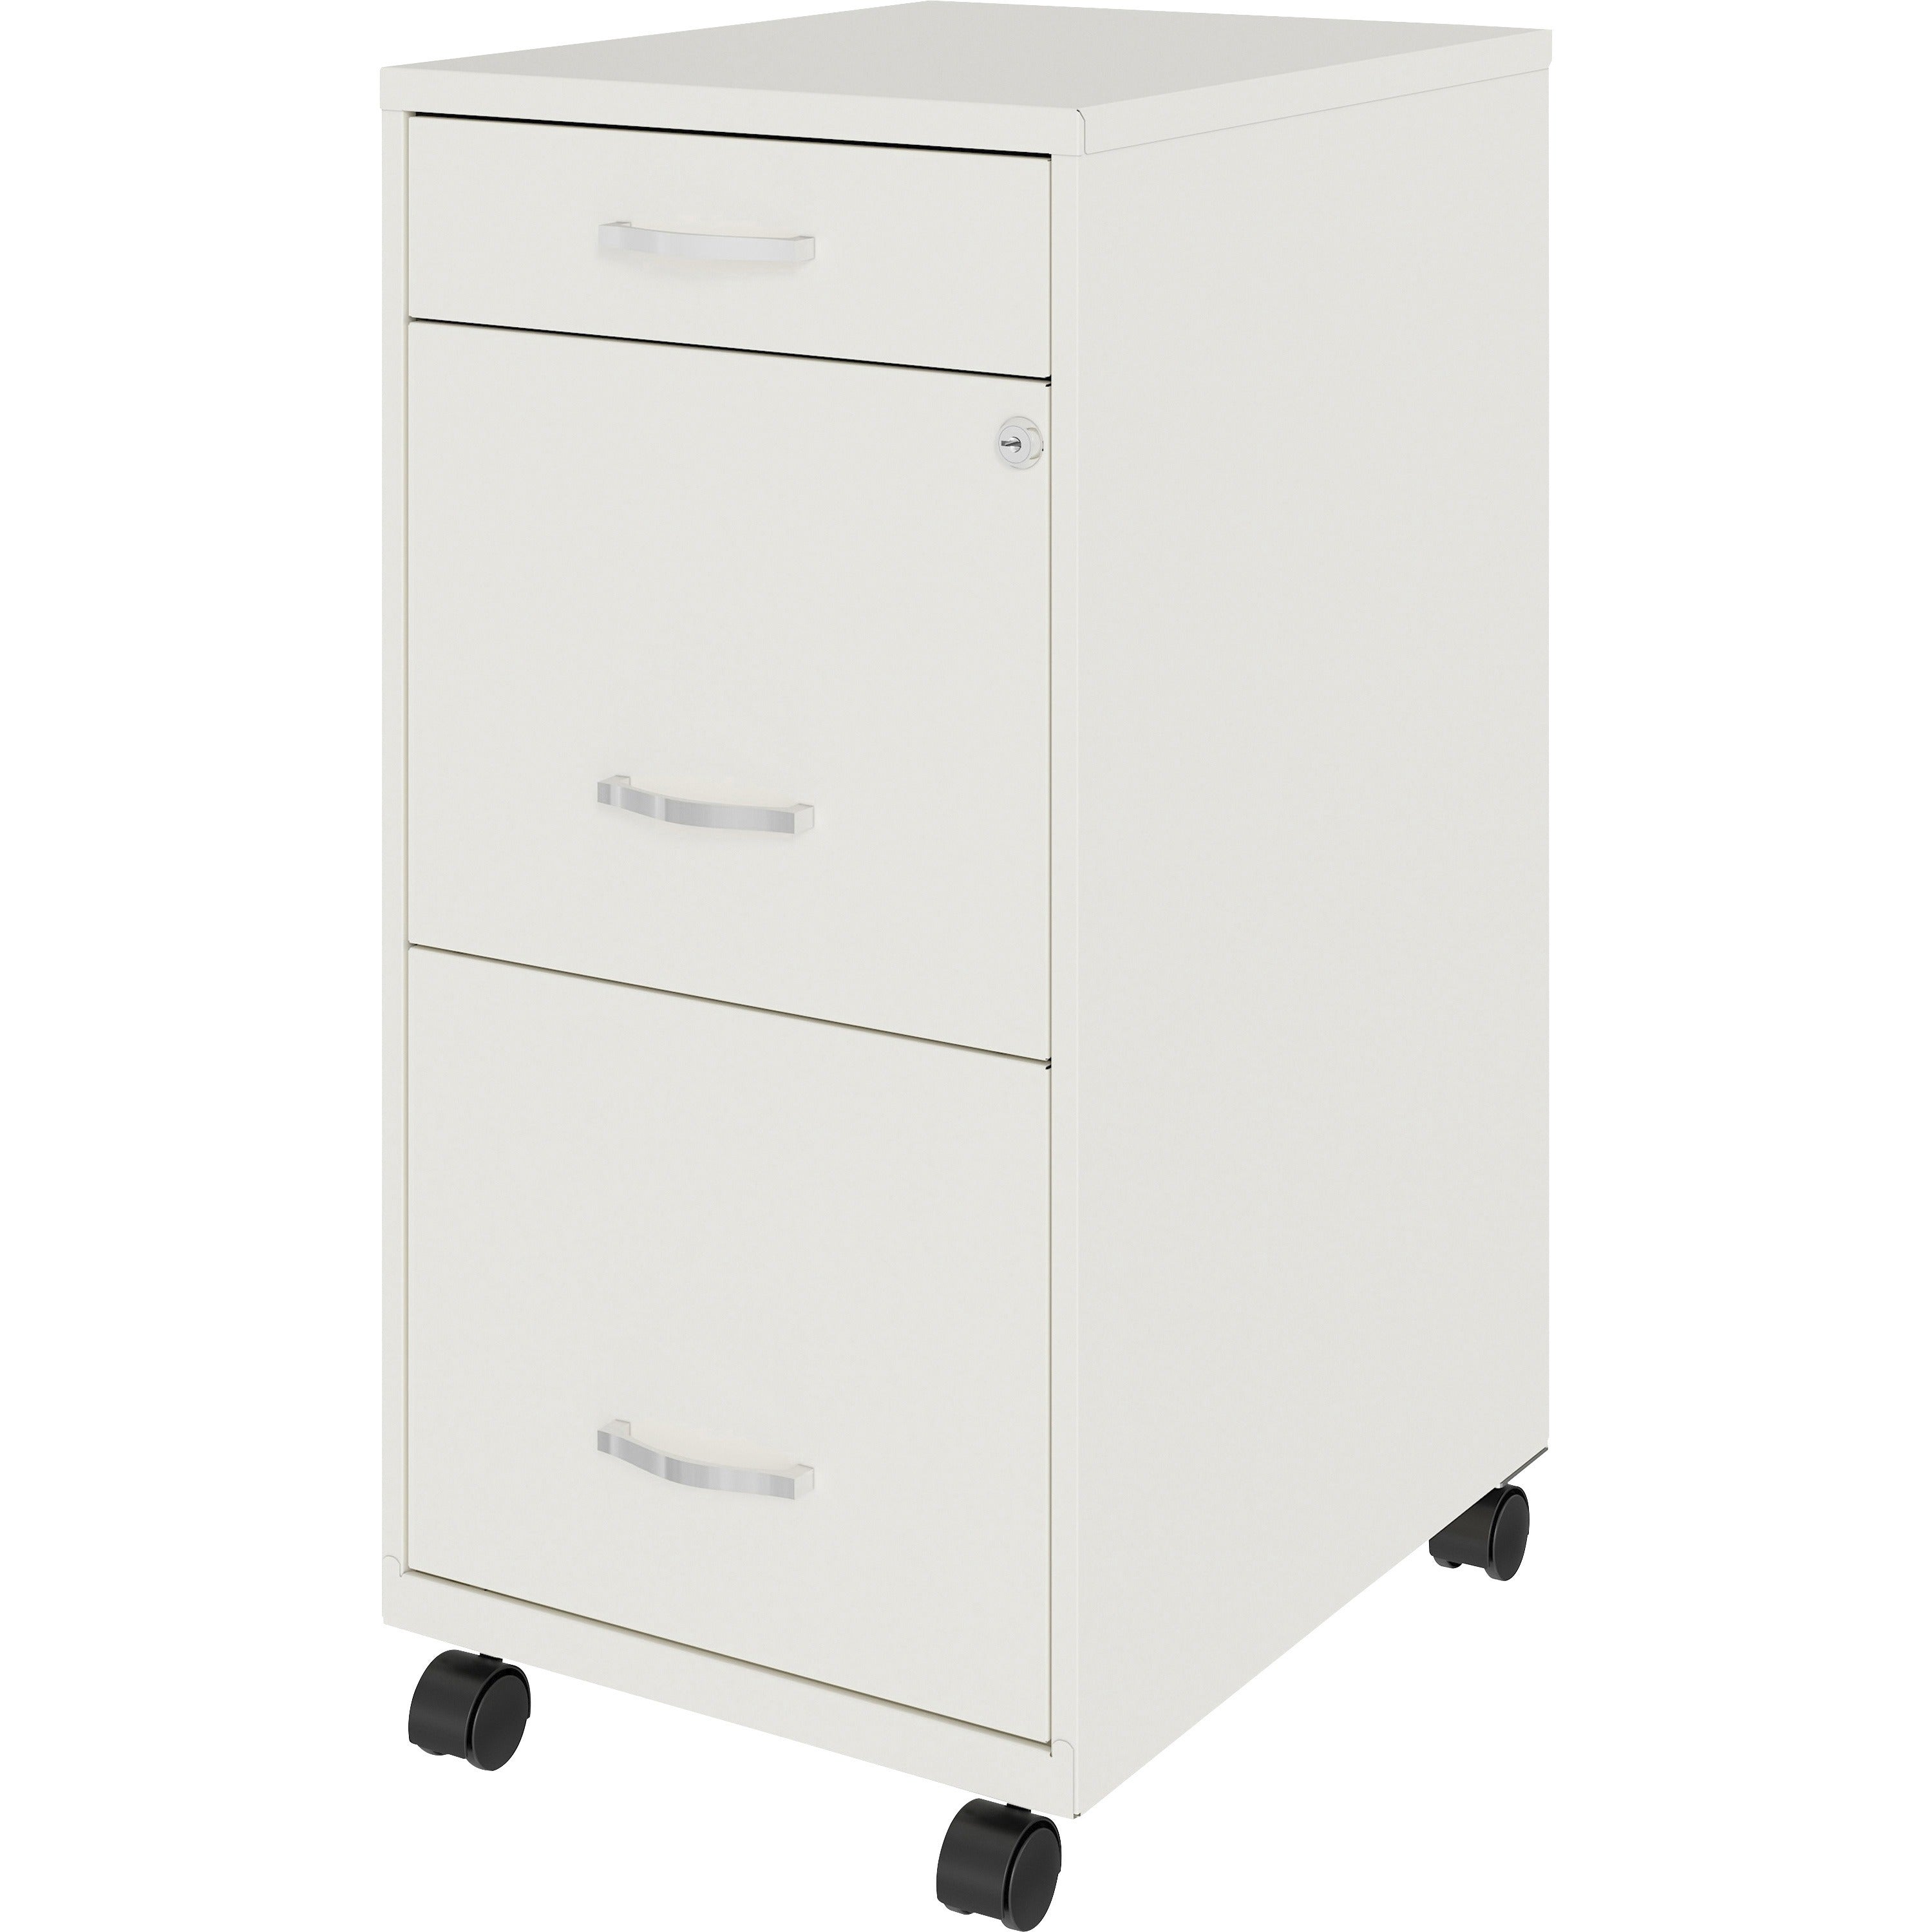 nusparc-mobile-file-cabinet-142-x-18-x-295-3-x-drawers-for-file-box-letter-mobility-locking-drawer-glide-suspension-3-4-drawer-extension-cam-lock-nonporous-surface-white-painted-steel-recycled_nprvf318bmwe - 3